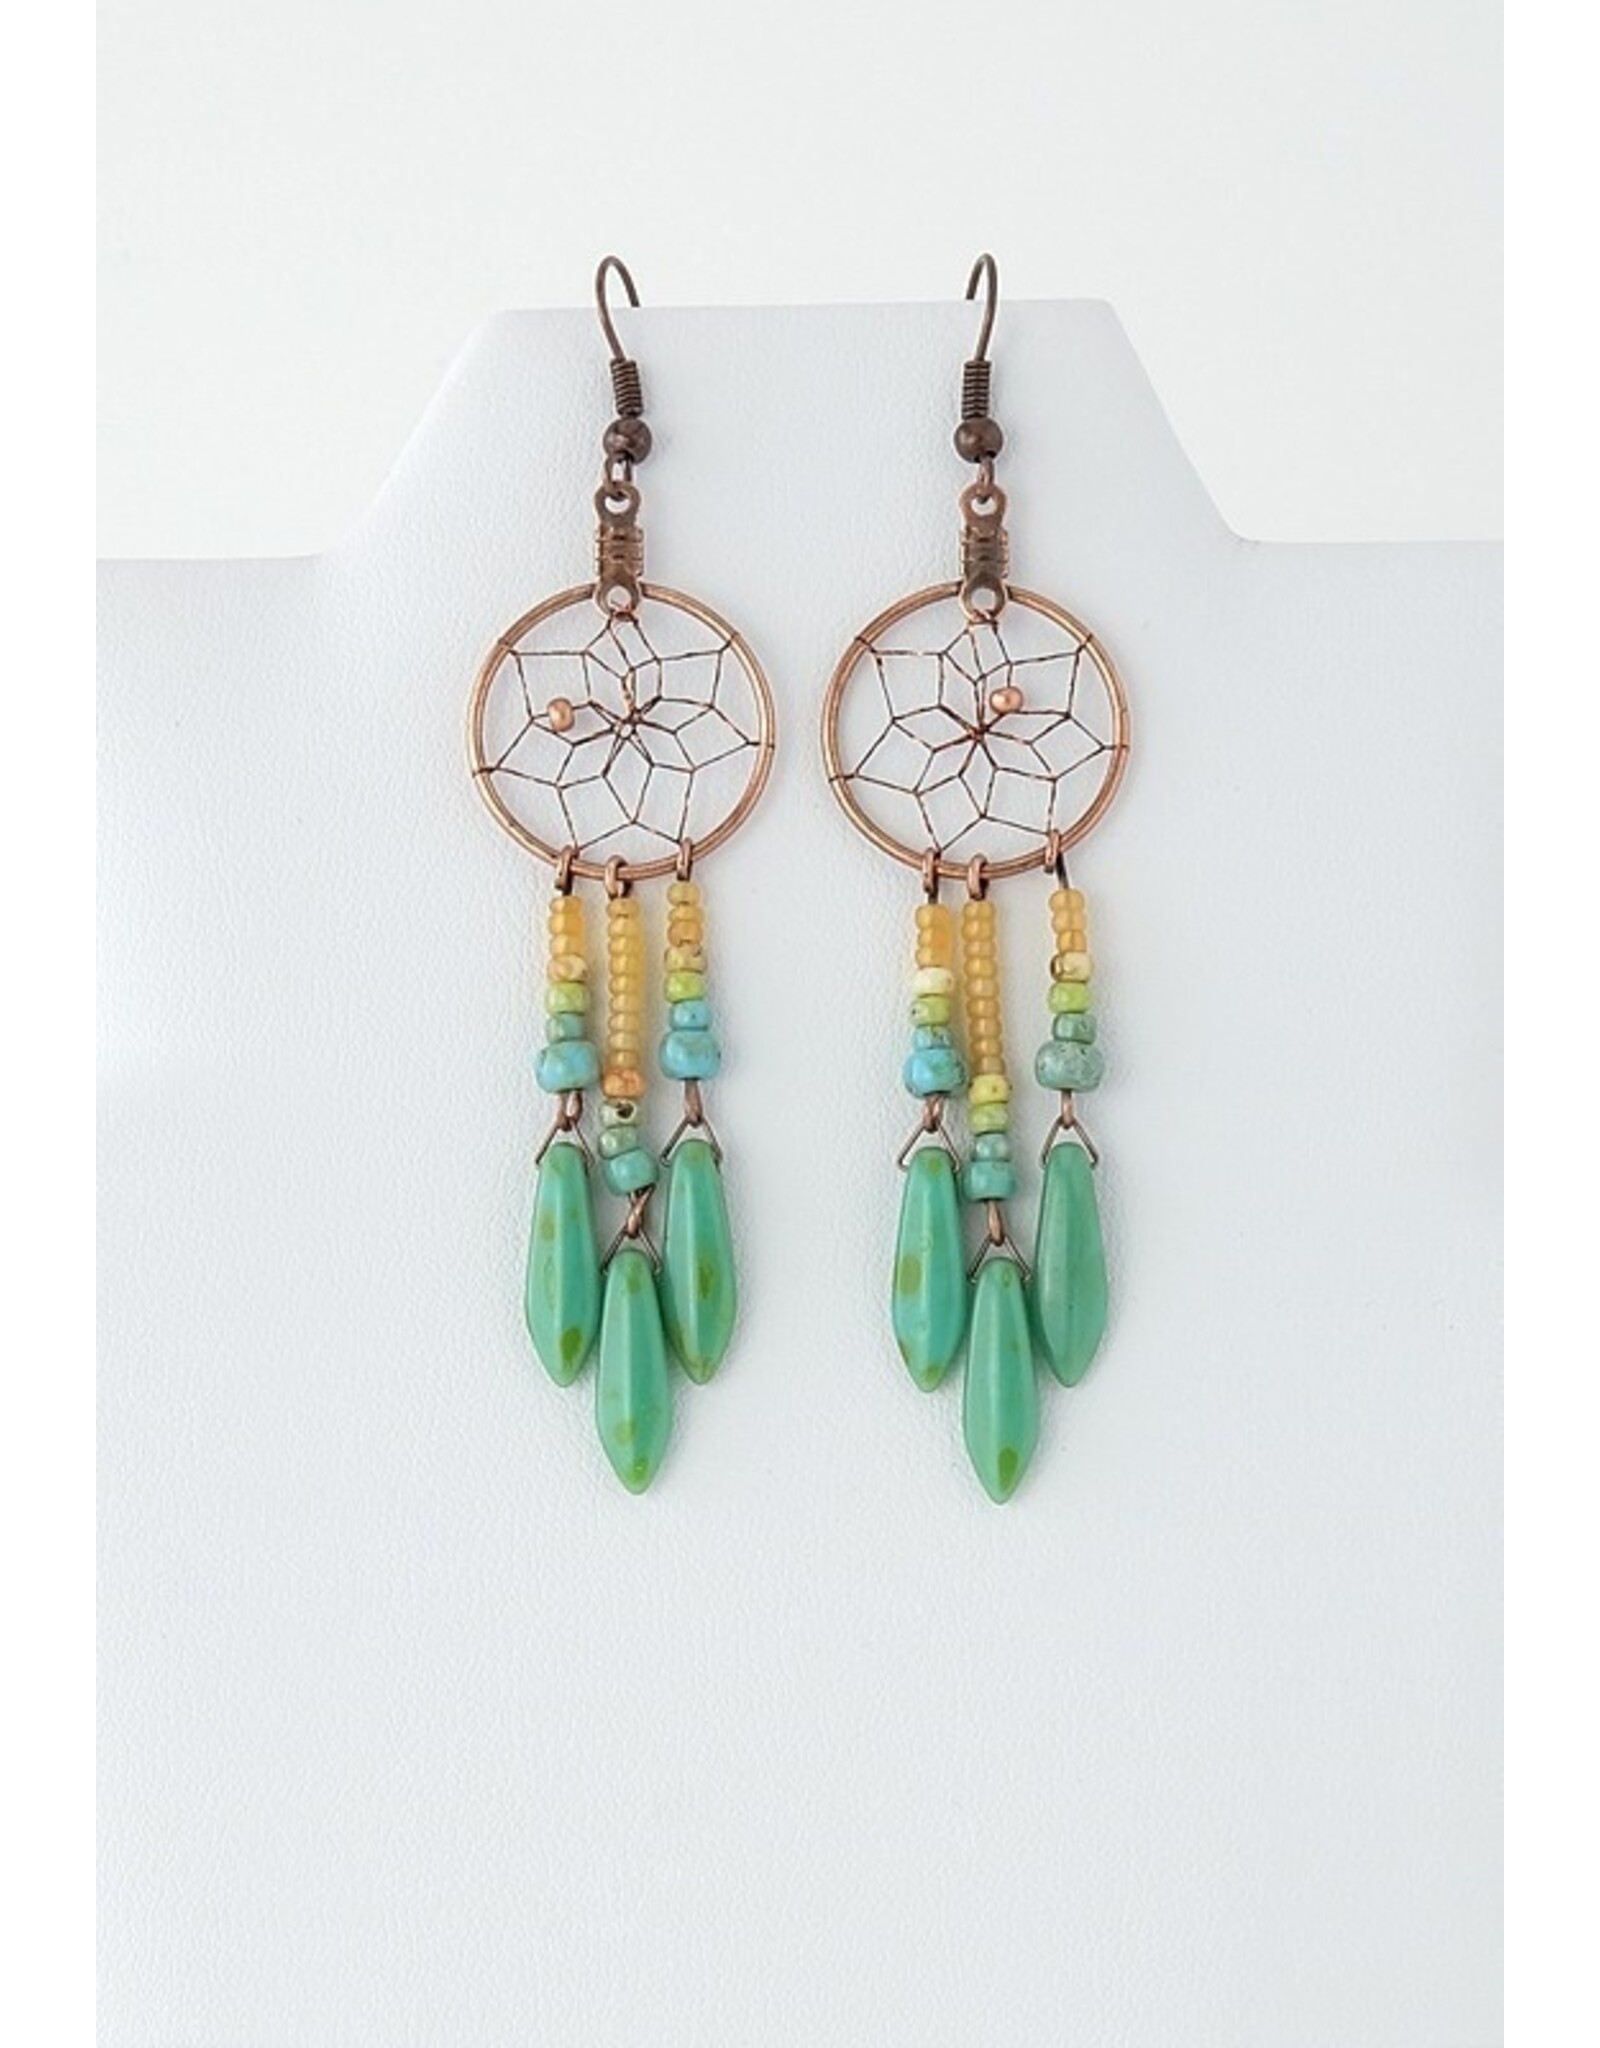 Dreamcather Earrings - DCC21